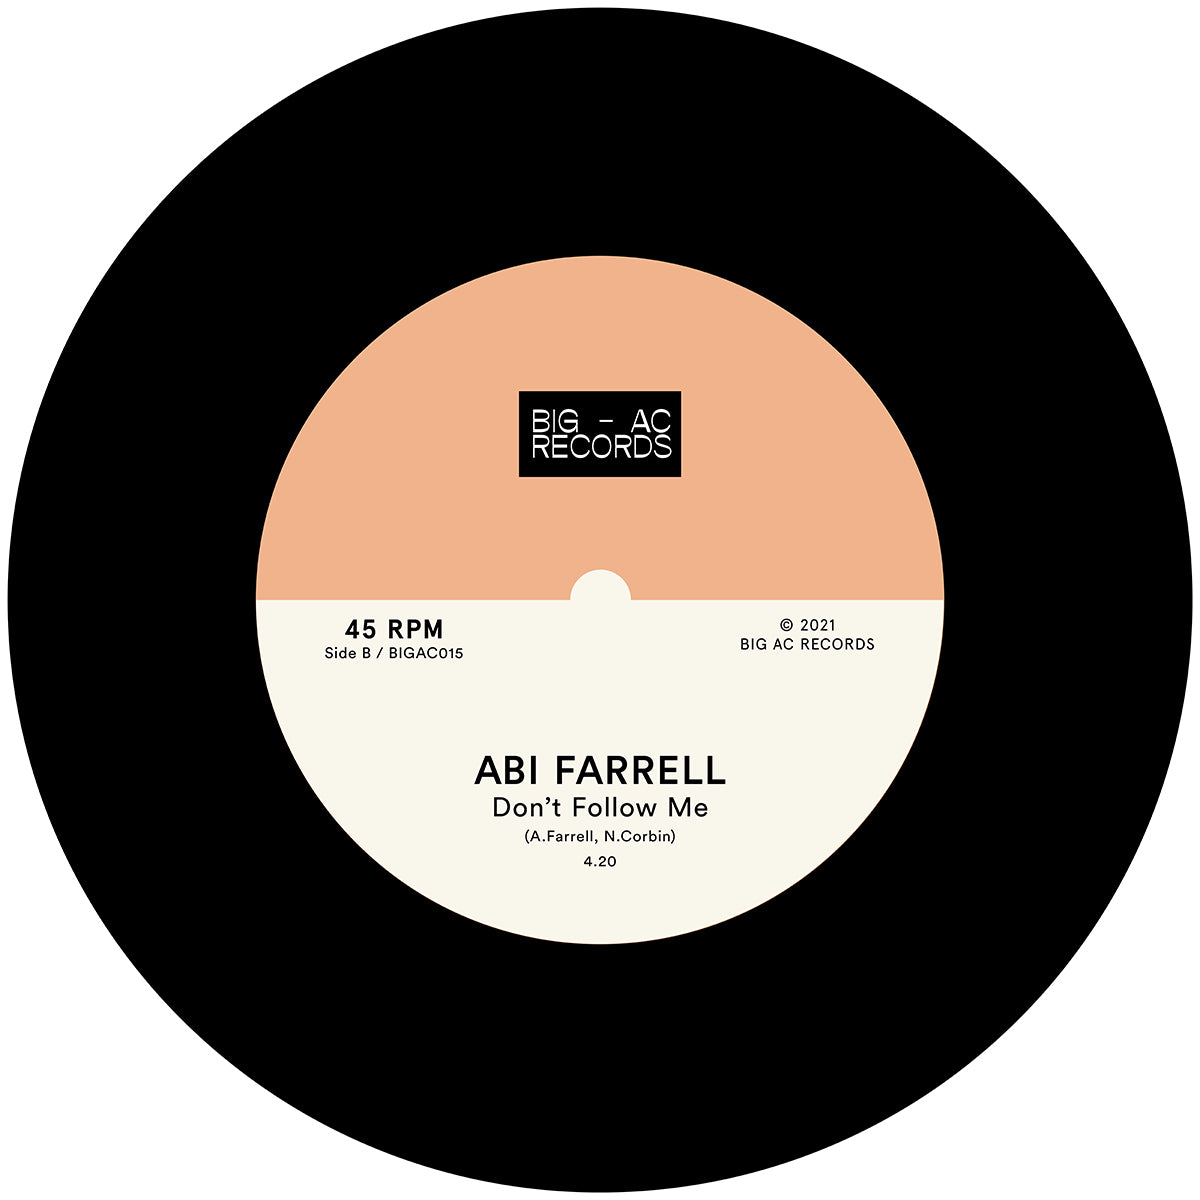 Abi Farrell - Stepping Out Of Your Shadow / Don't Follow Me 7" Vinyl